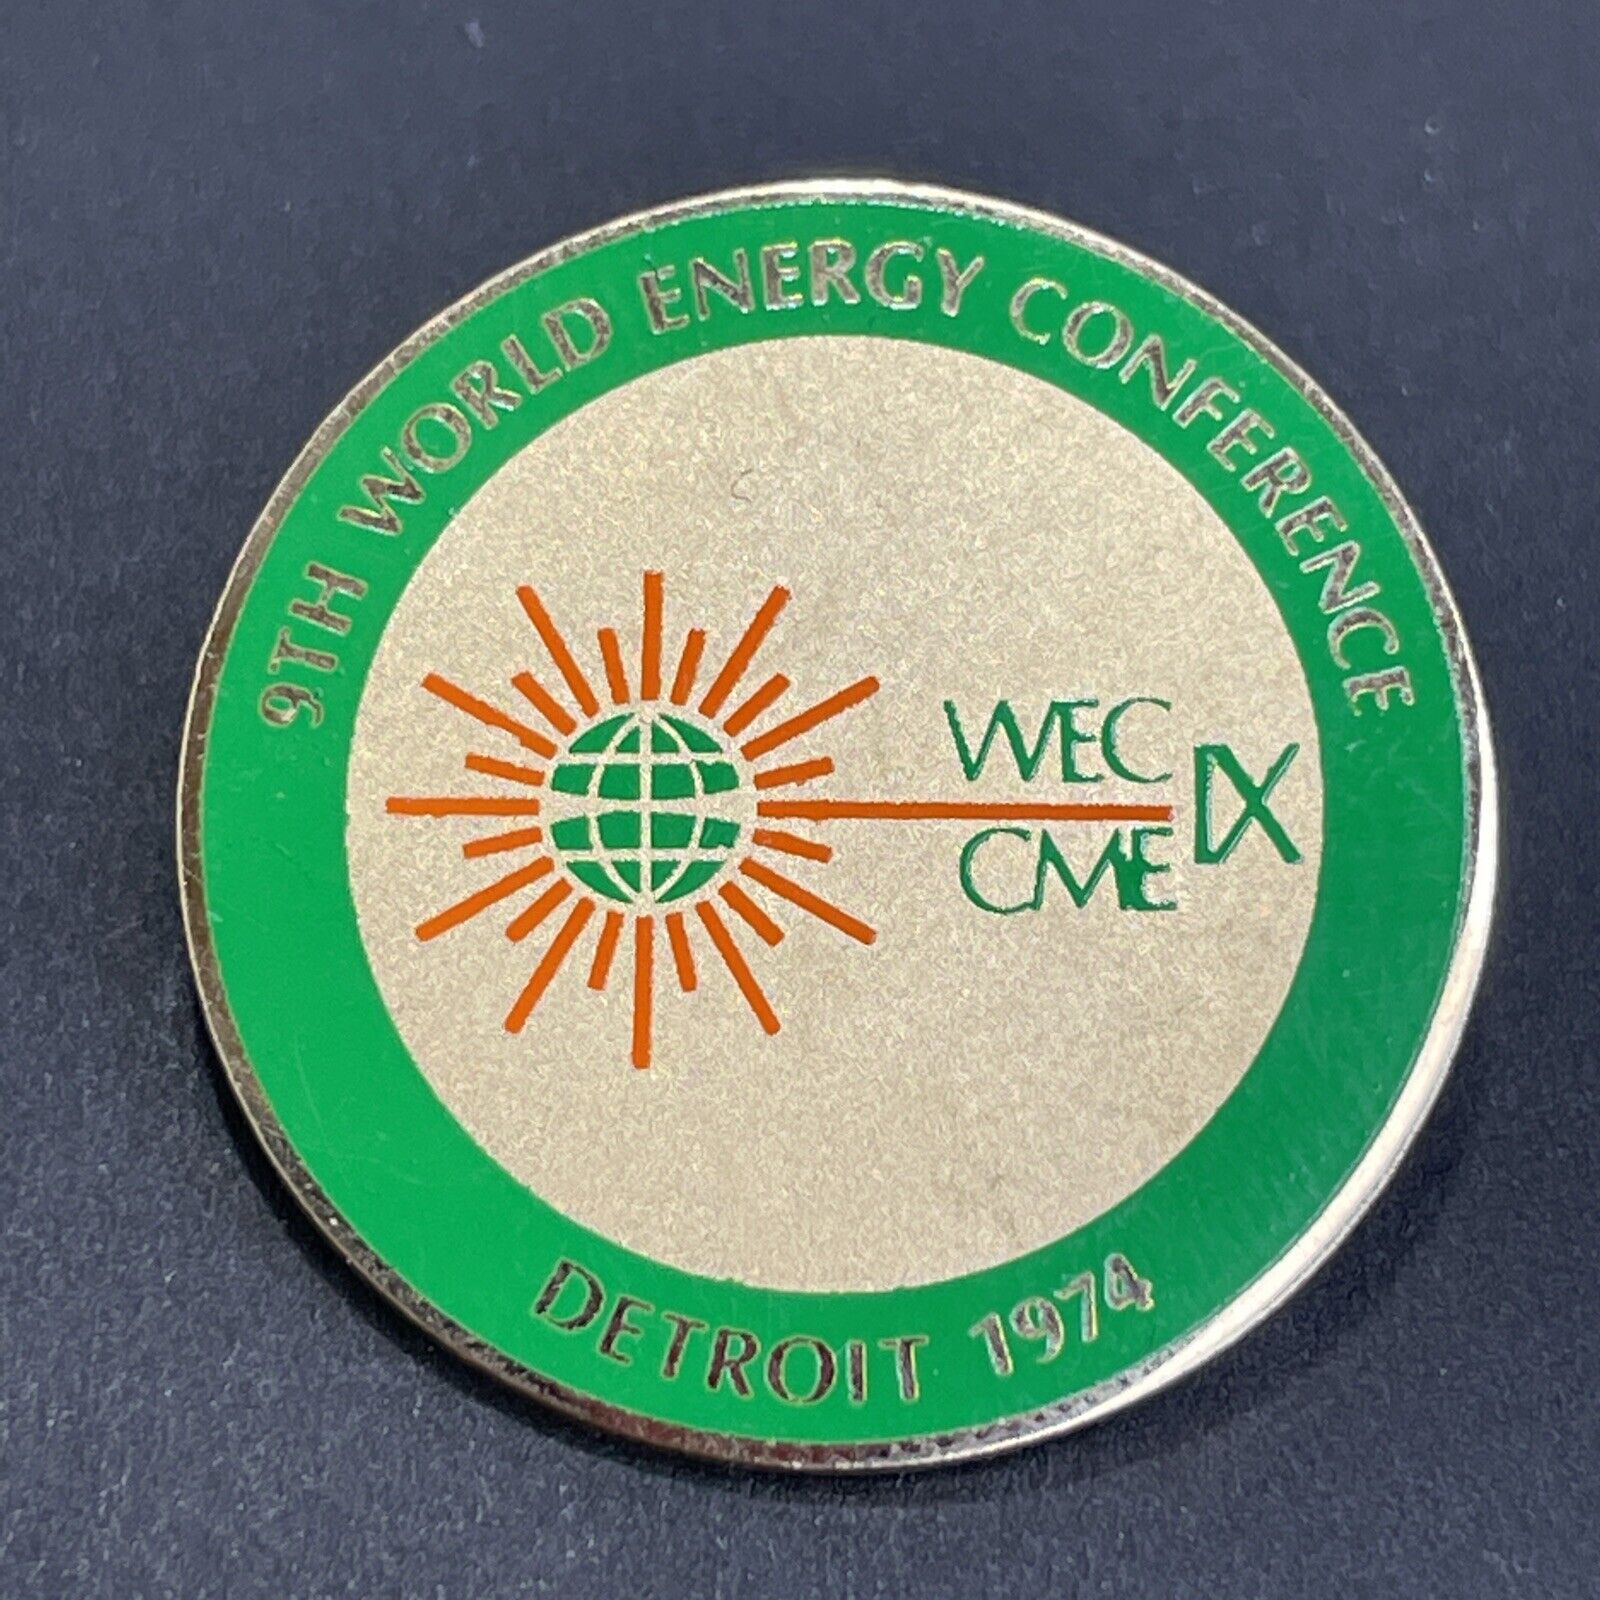 Vintage 1974 9th World Energy Conference Detroit Michigan Pinback Pin Button